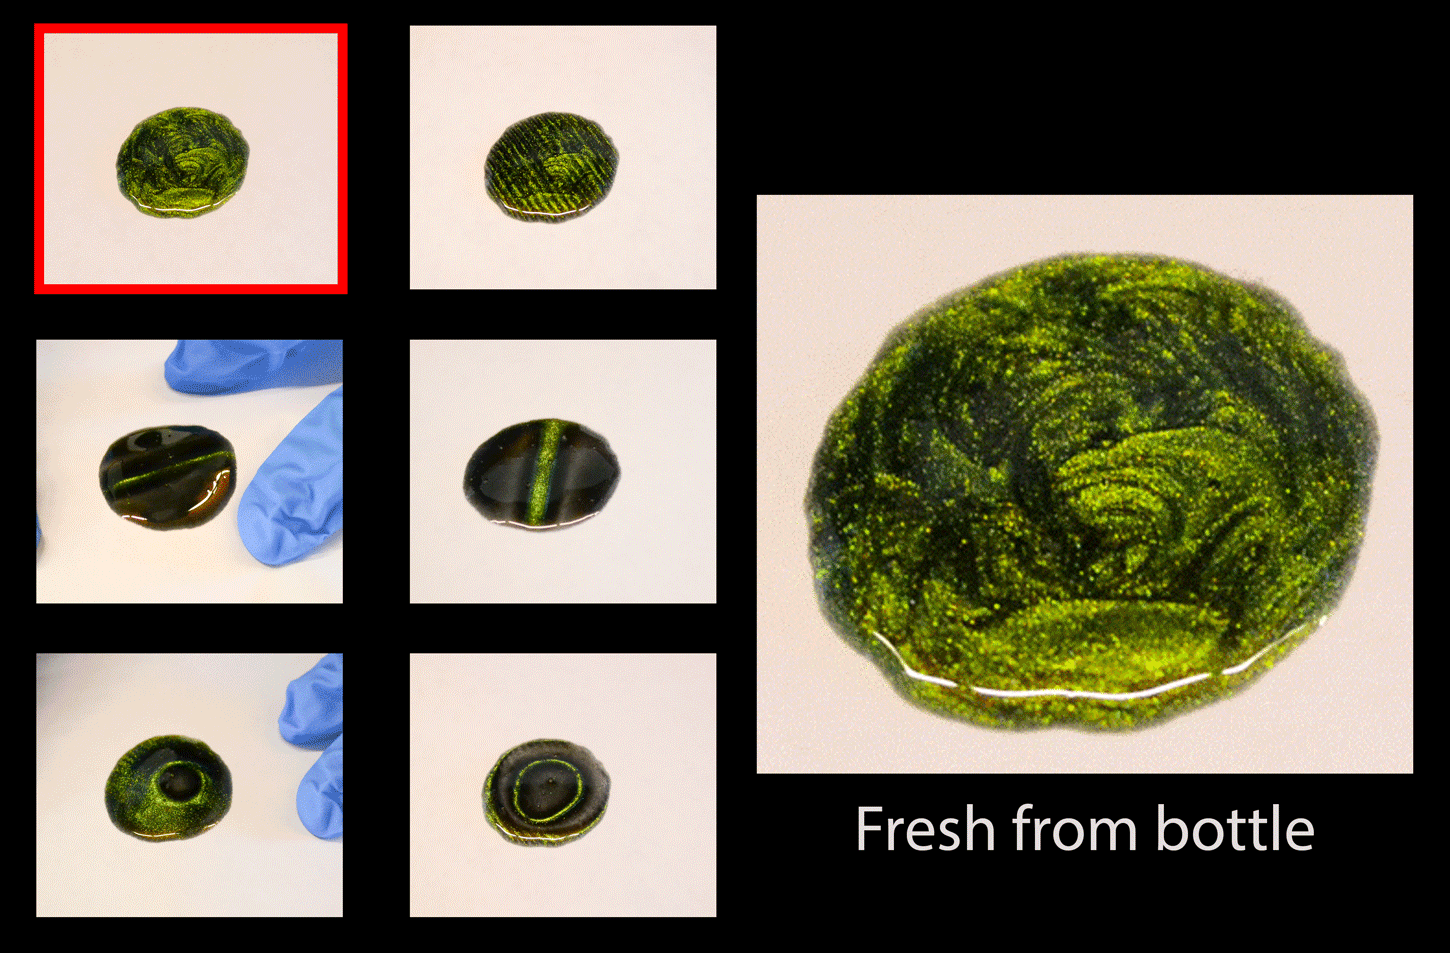 Fig. 3 These images show the appearance of the nail polish (left to right) fresh out of the bottle, and with patterns made using a fridge magnet, a rectangular magnet, and a disc magnet, respectively.